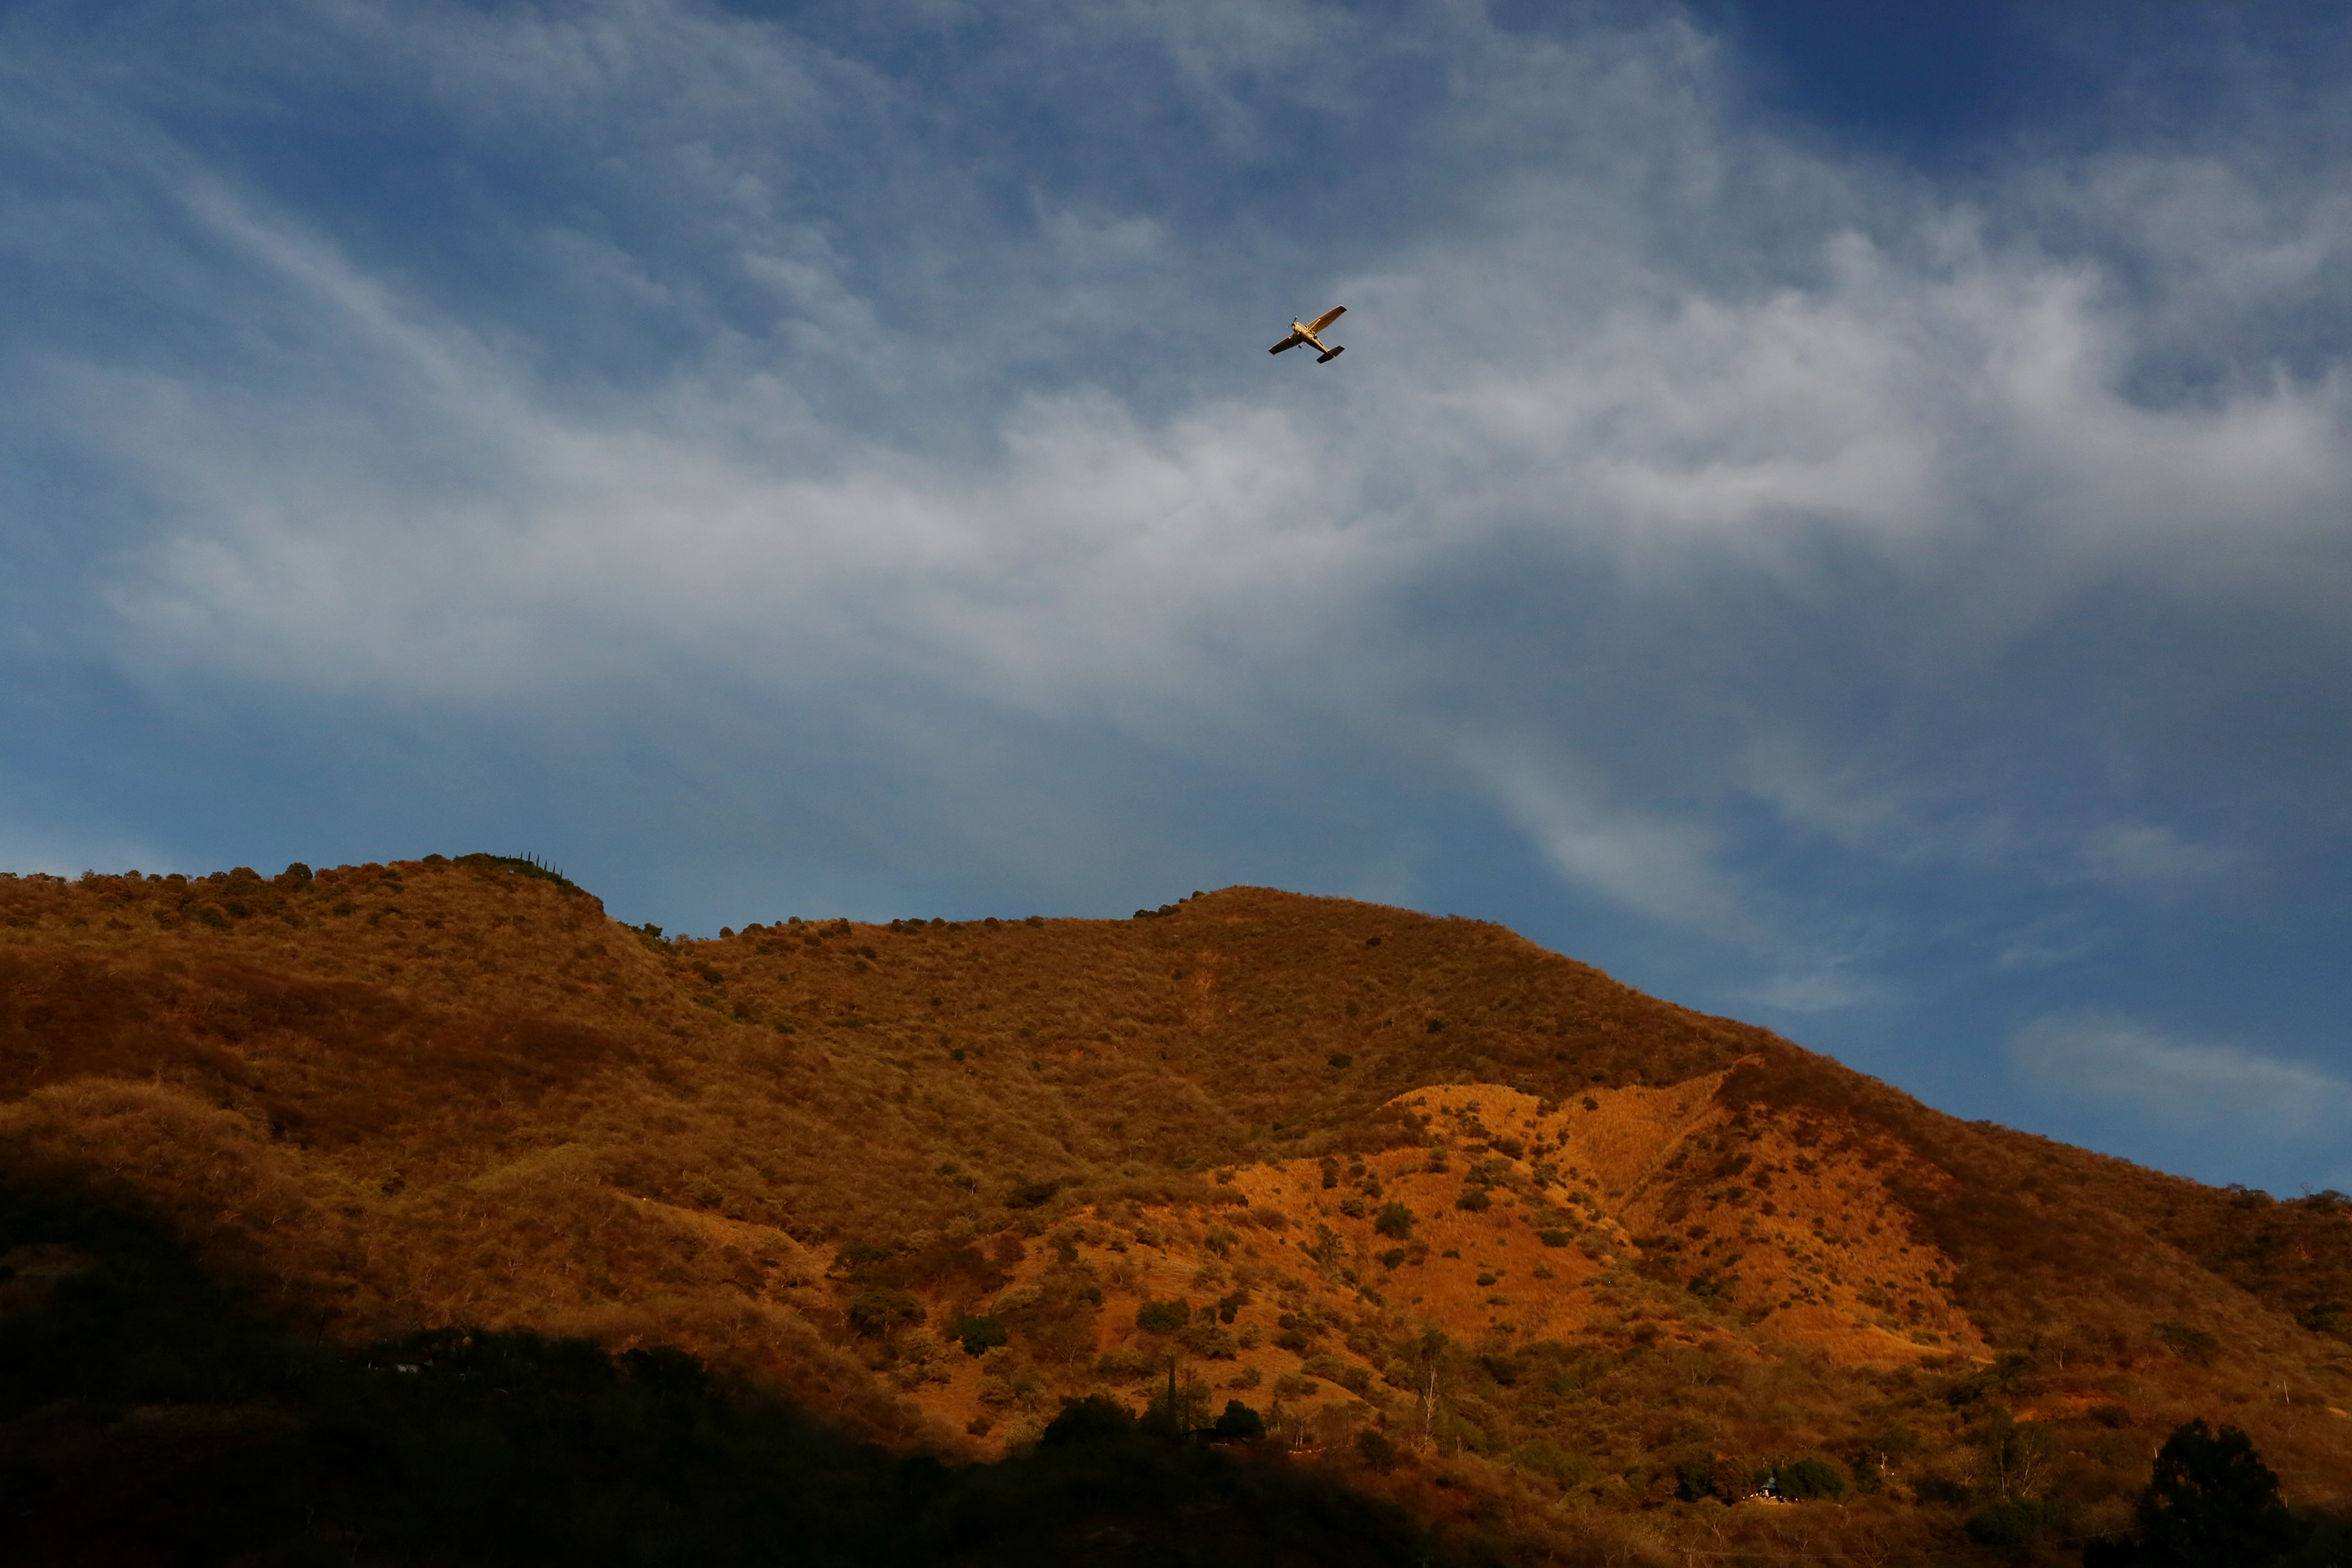 A small private plane takes off from the hilltop next to La Tuna in February. (Kirsten Luce for TIME)